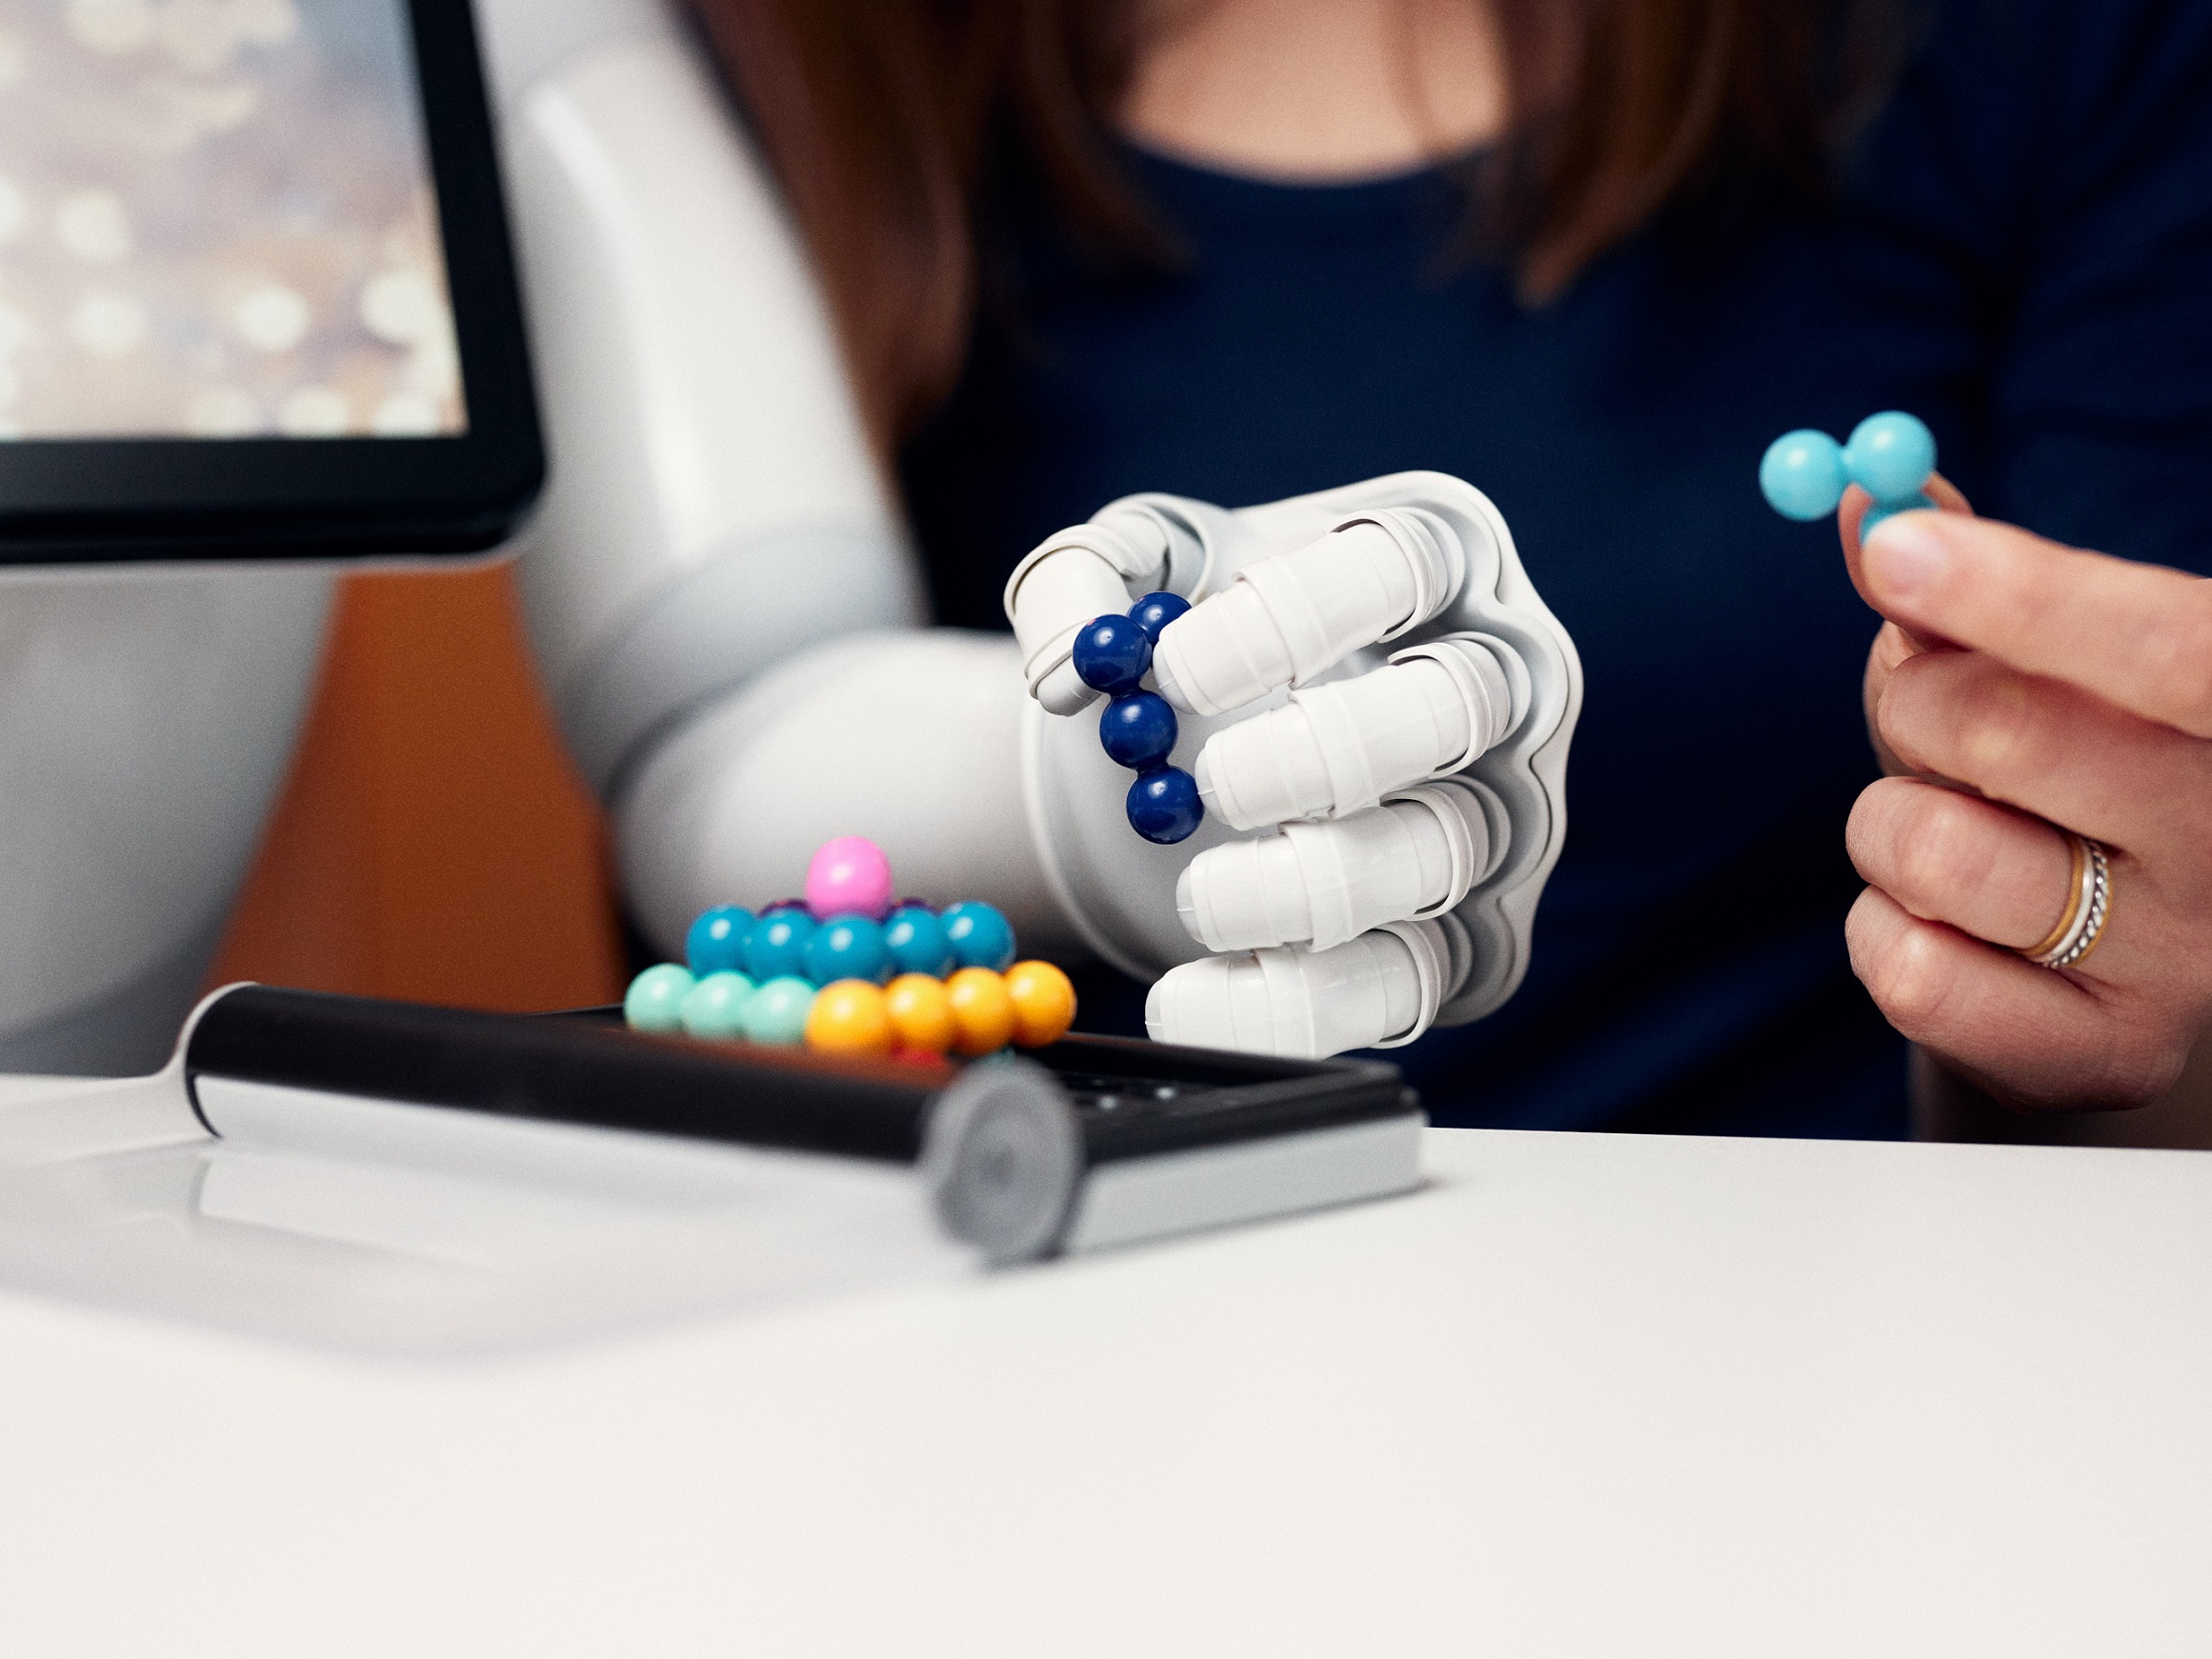 Hands of a robot and a human solving a ball puzzle together